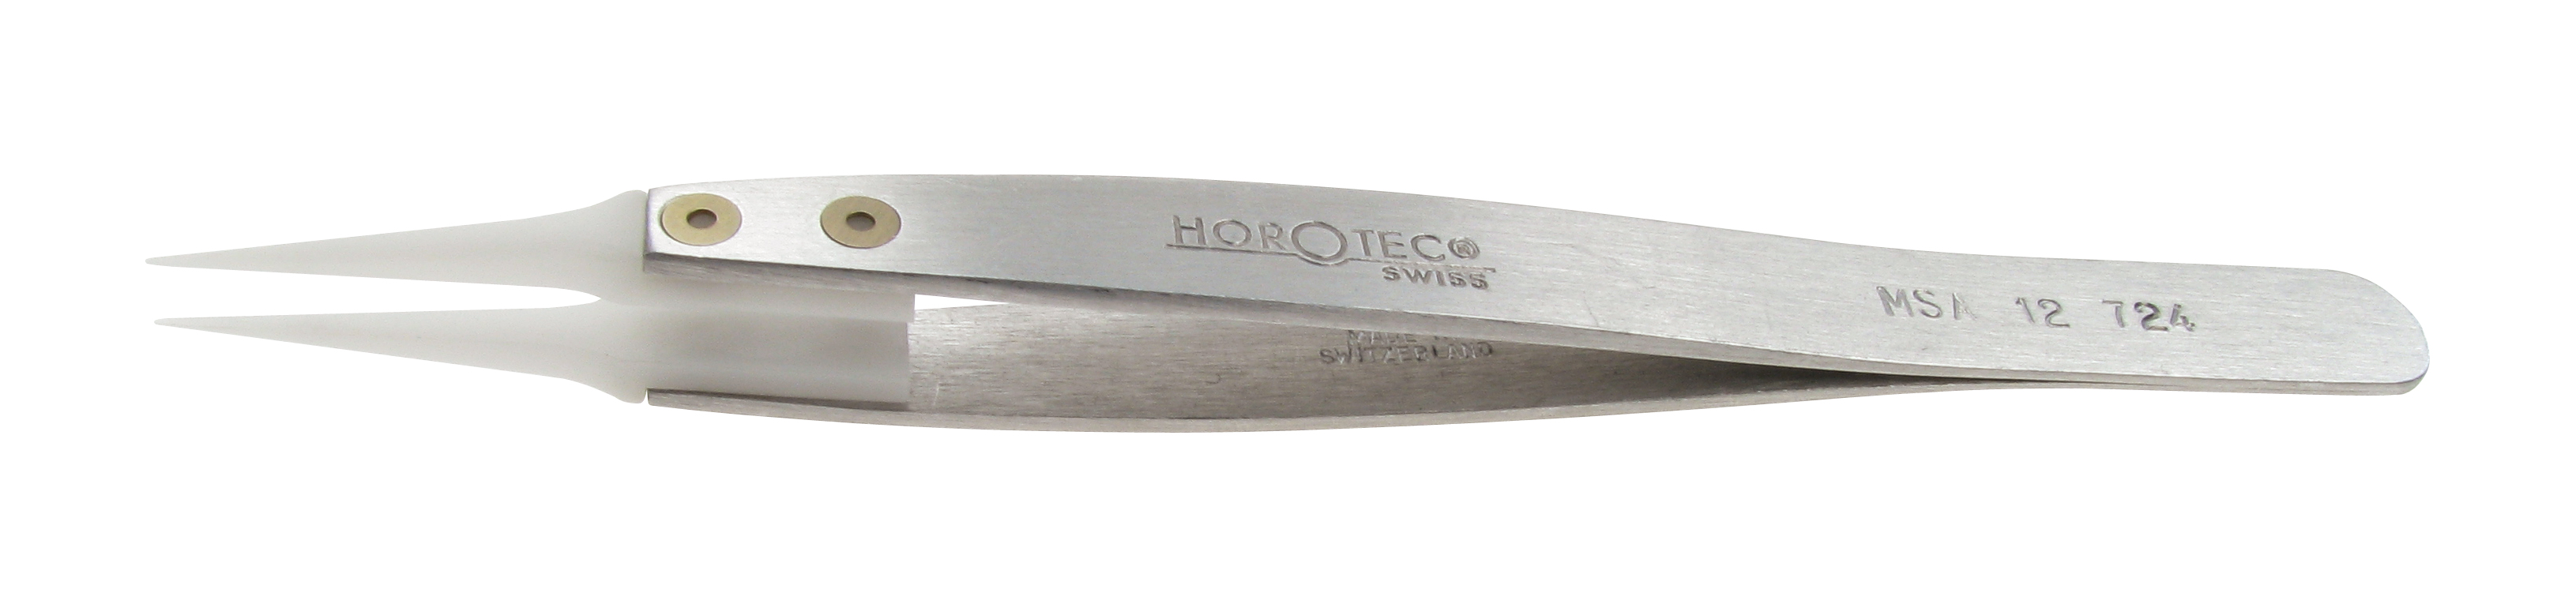 Aluminium forceps with Delrin tips, extra-fine Horotec